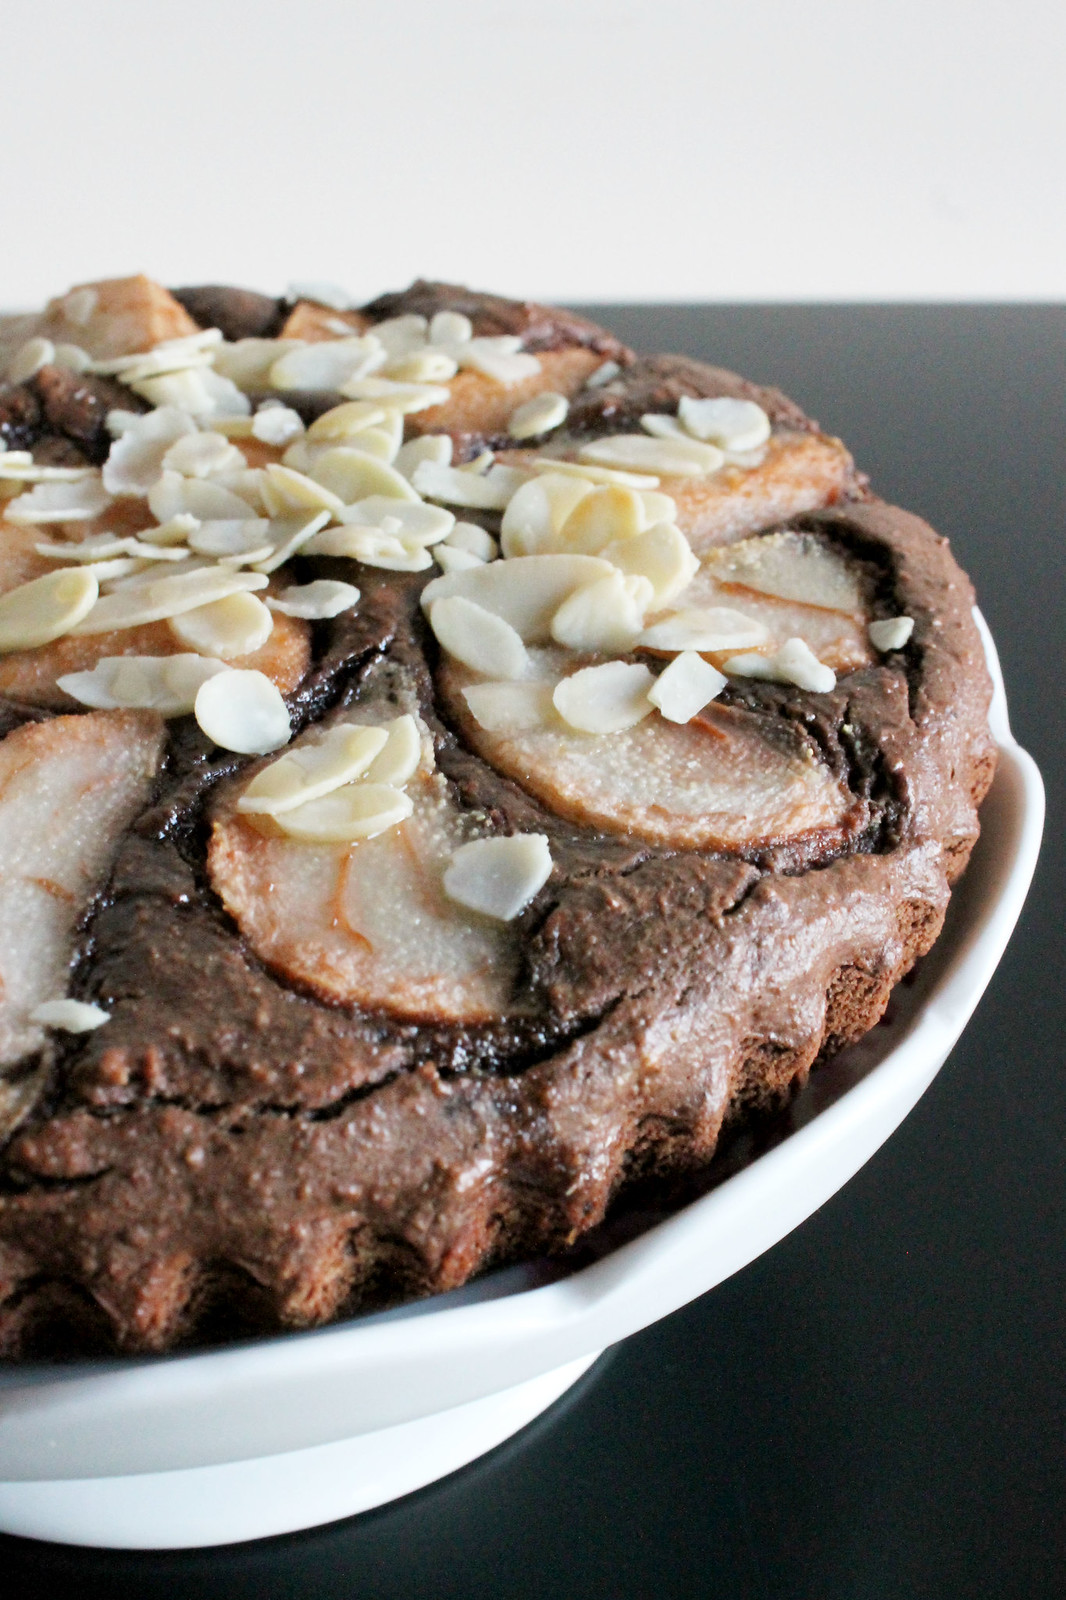 Pear and Almond Chocolate Torte